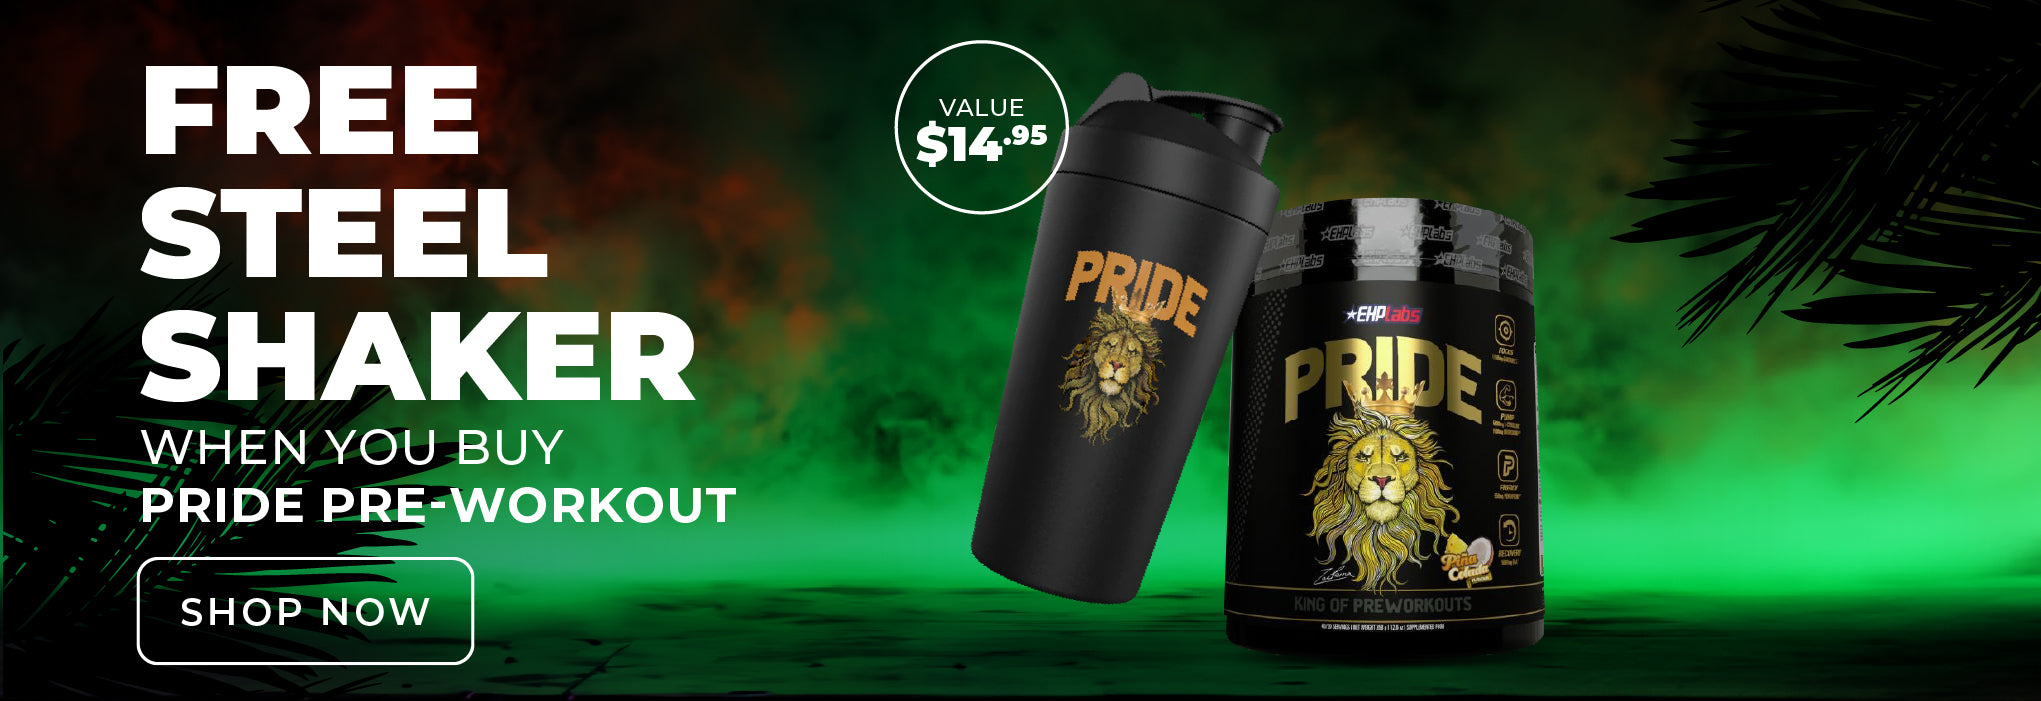 FREE Steel shaker when you buy pride pre-workout